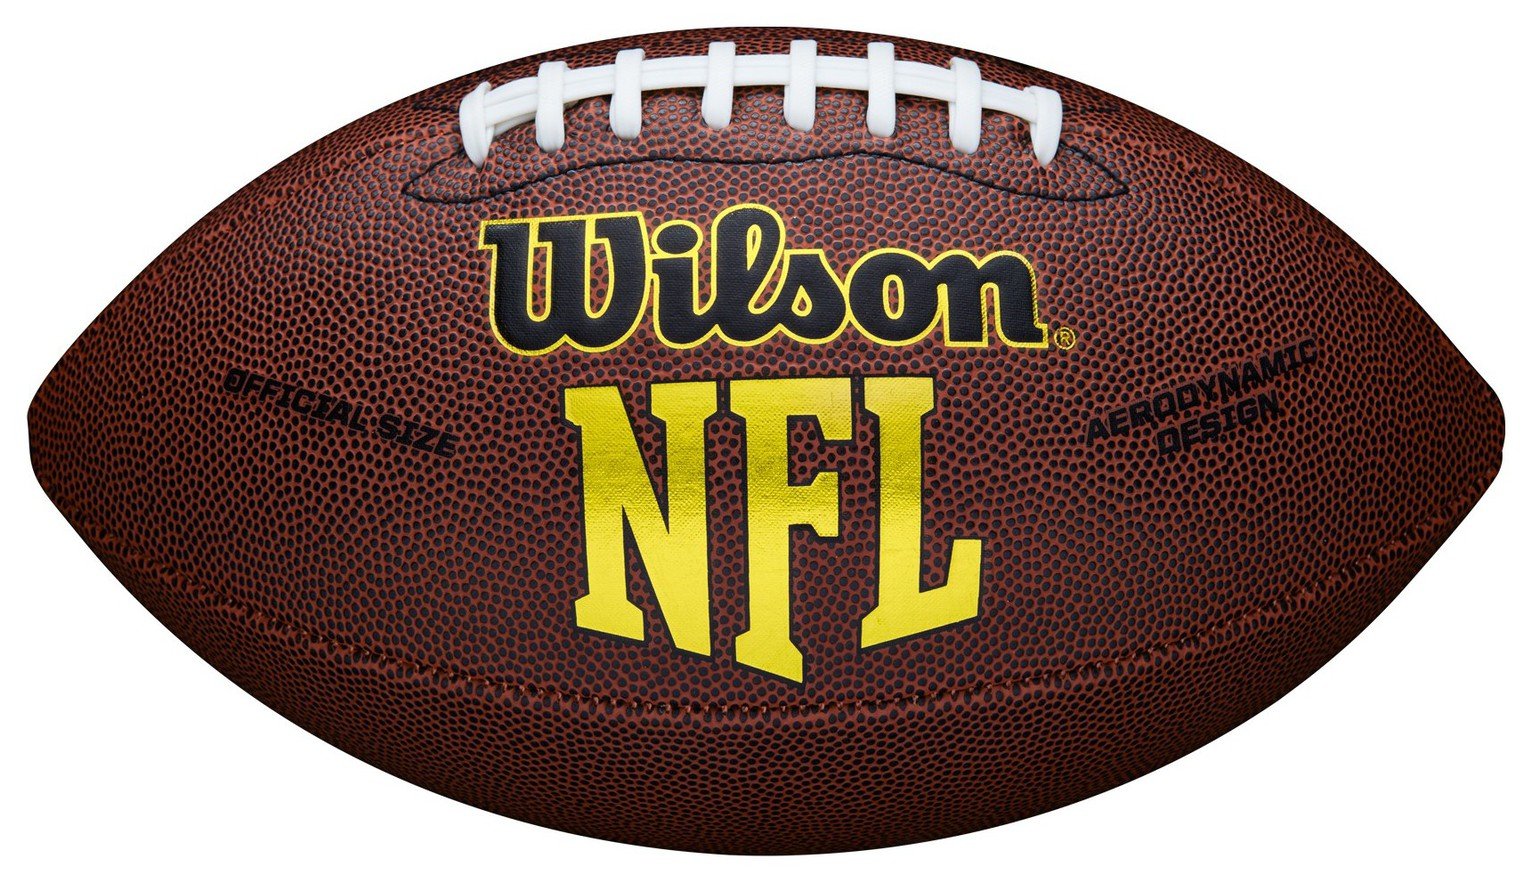 Wilson NFL Force American Football Review